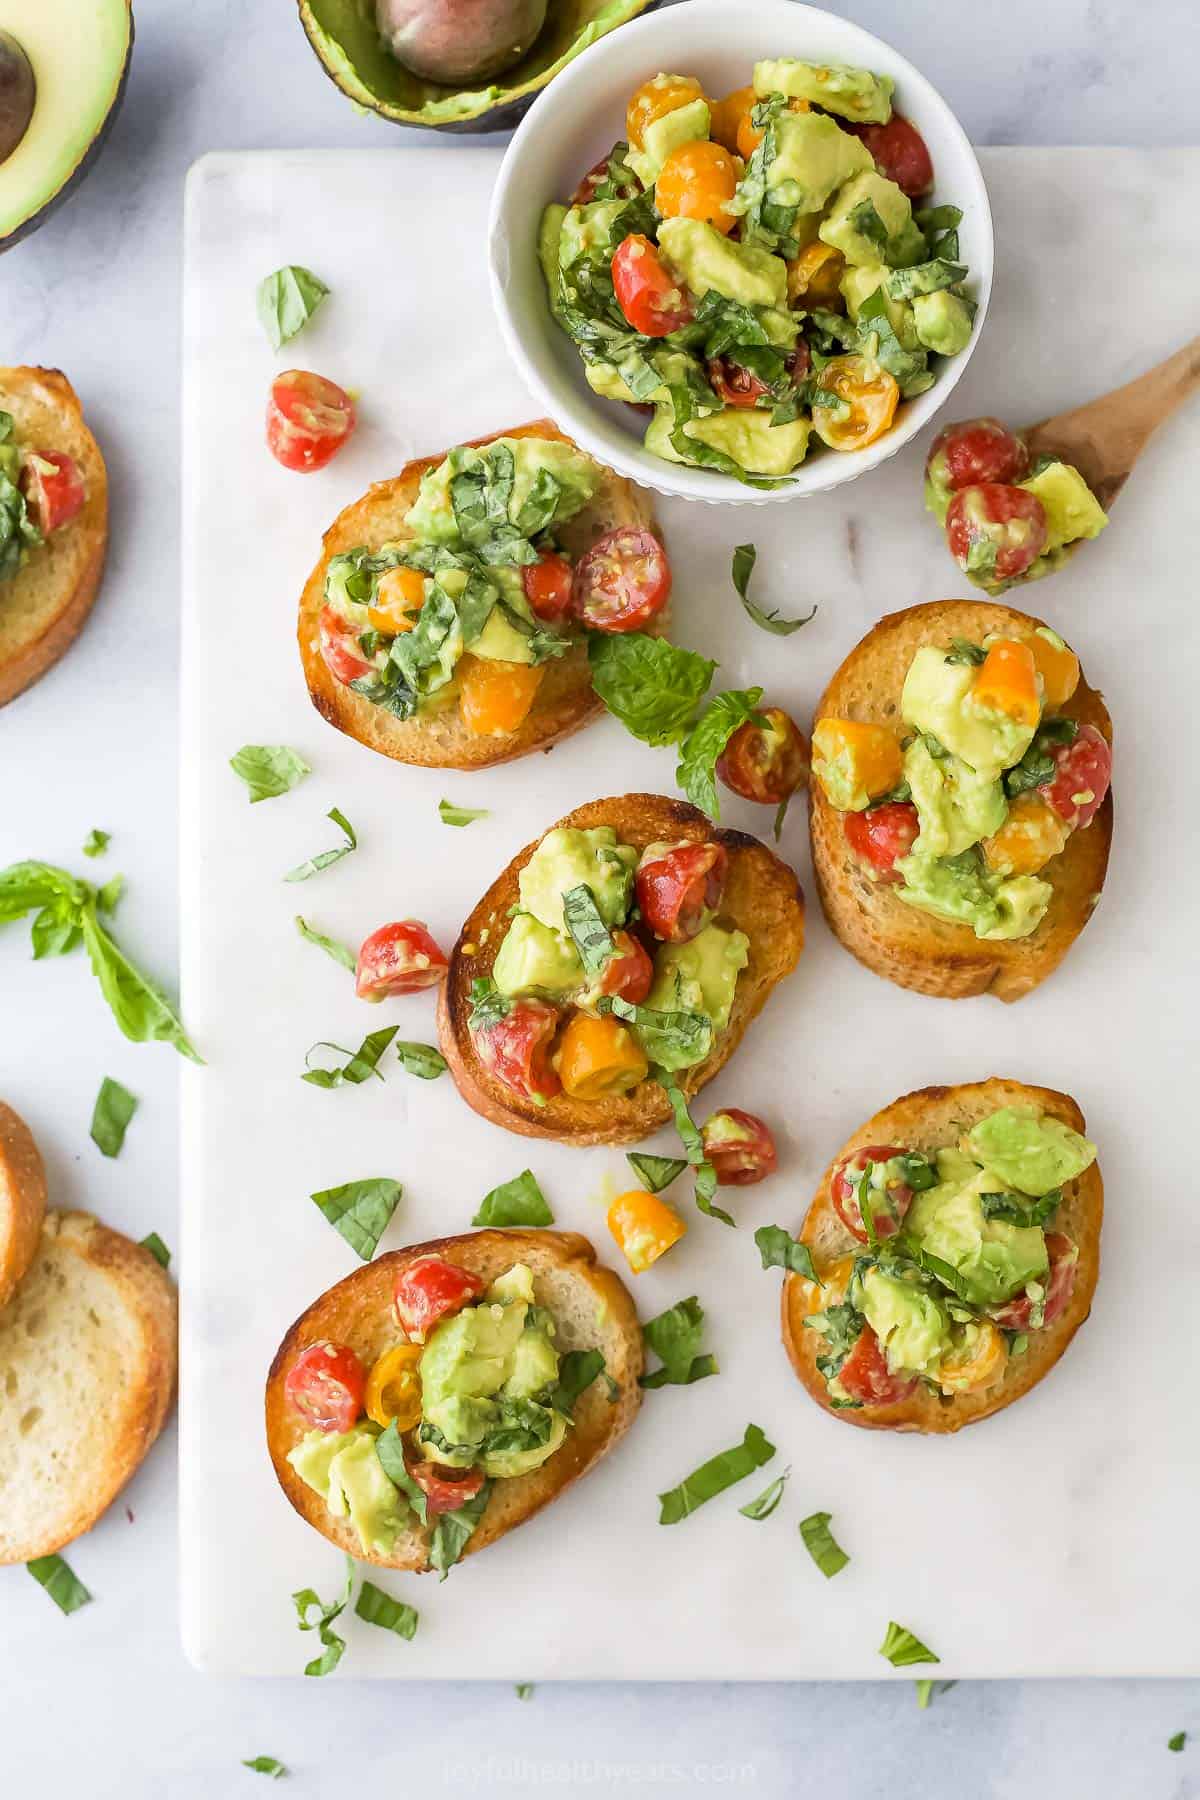 Five pieces of toast topped with avocado, tomatoes, basil, olive oil and white balsamic vinegar